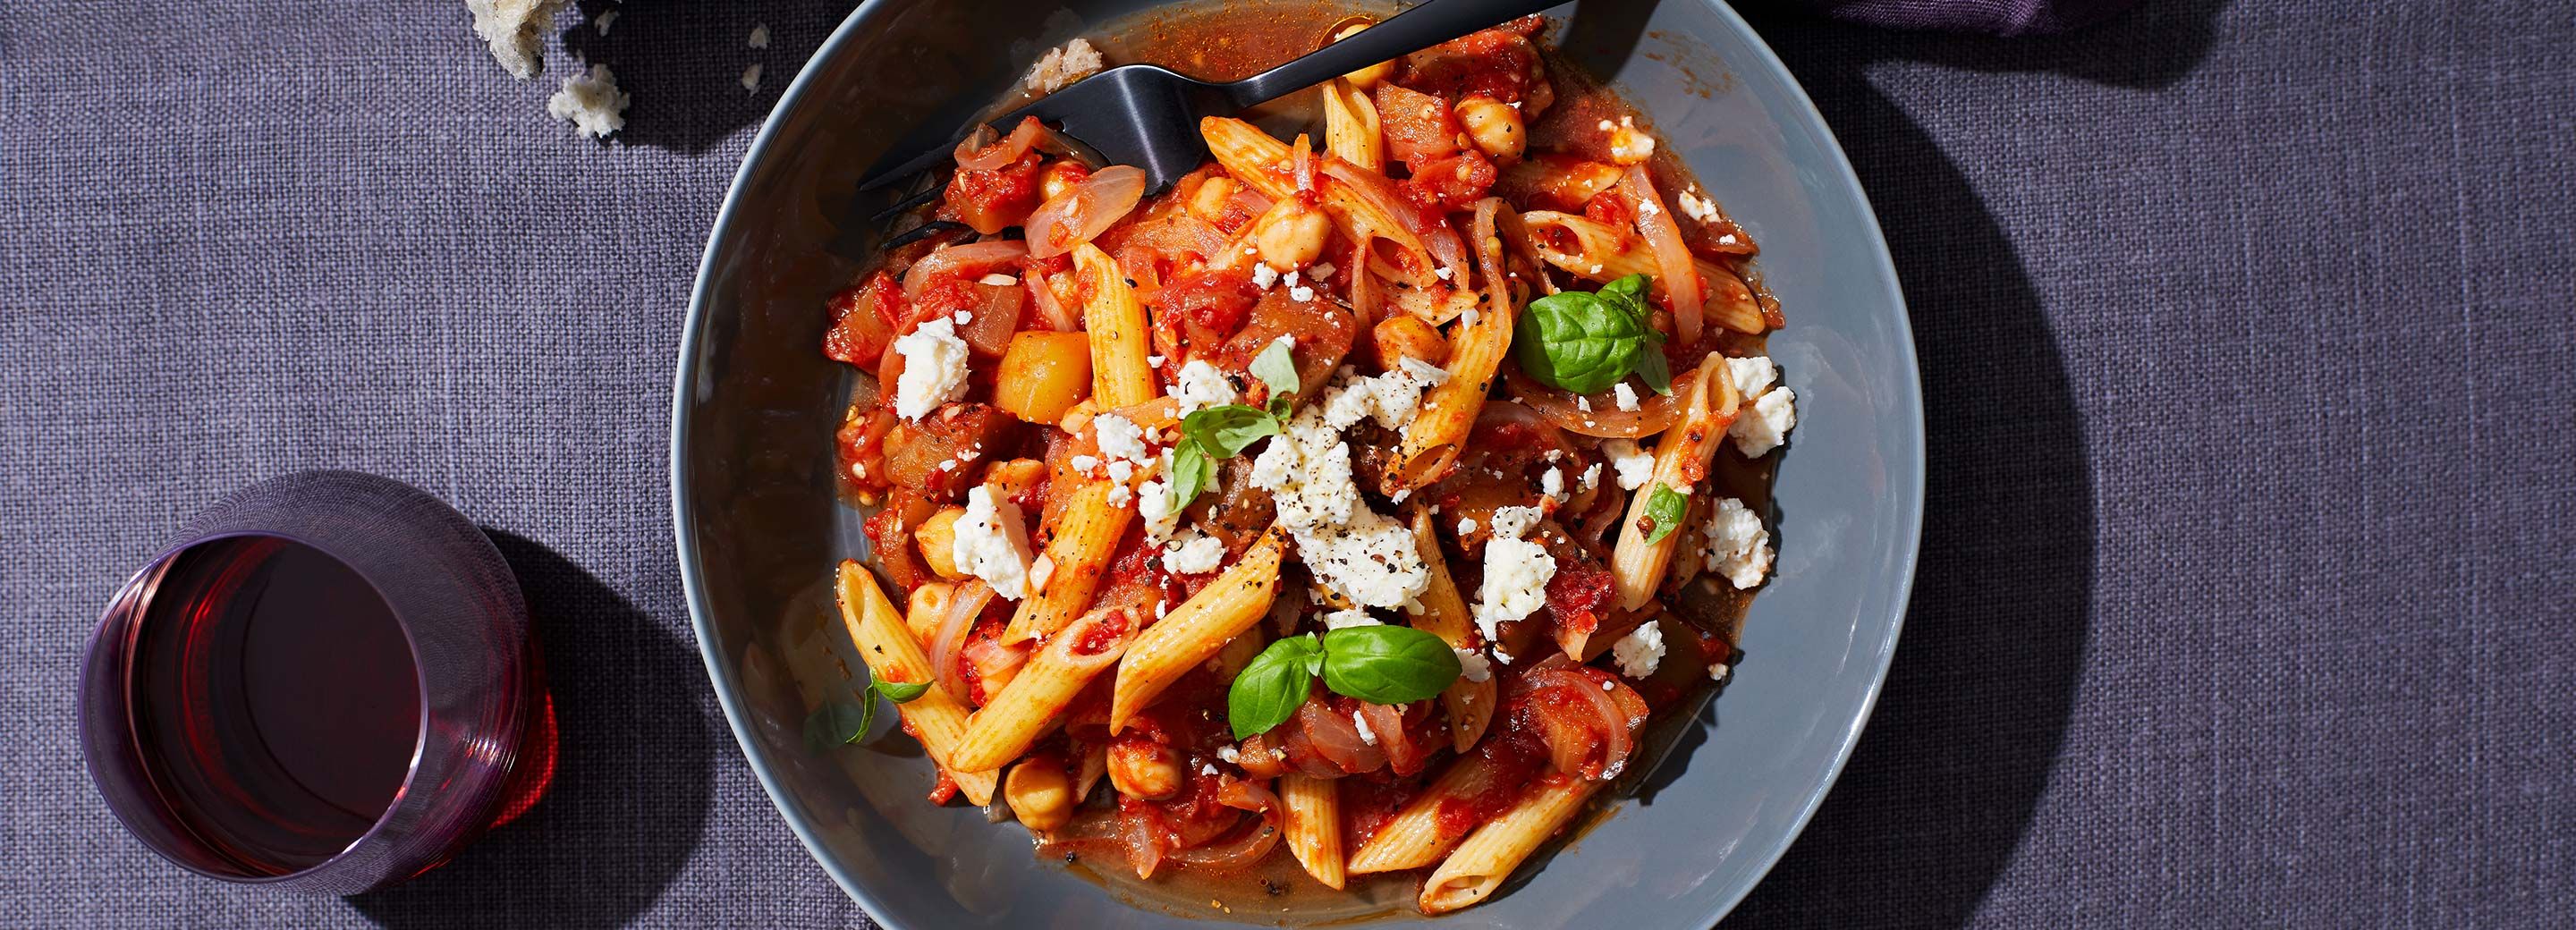 Penne with Eggplant, Tomatoes & Chickpeas